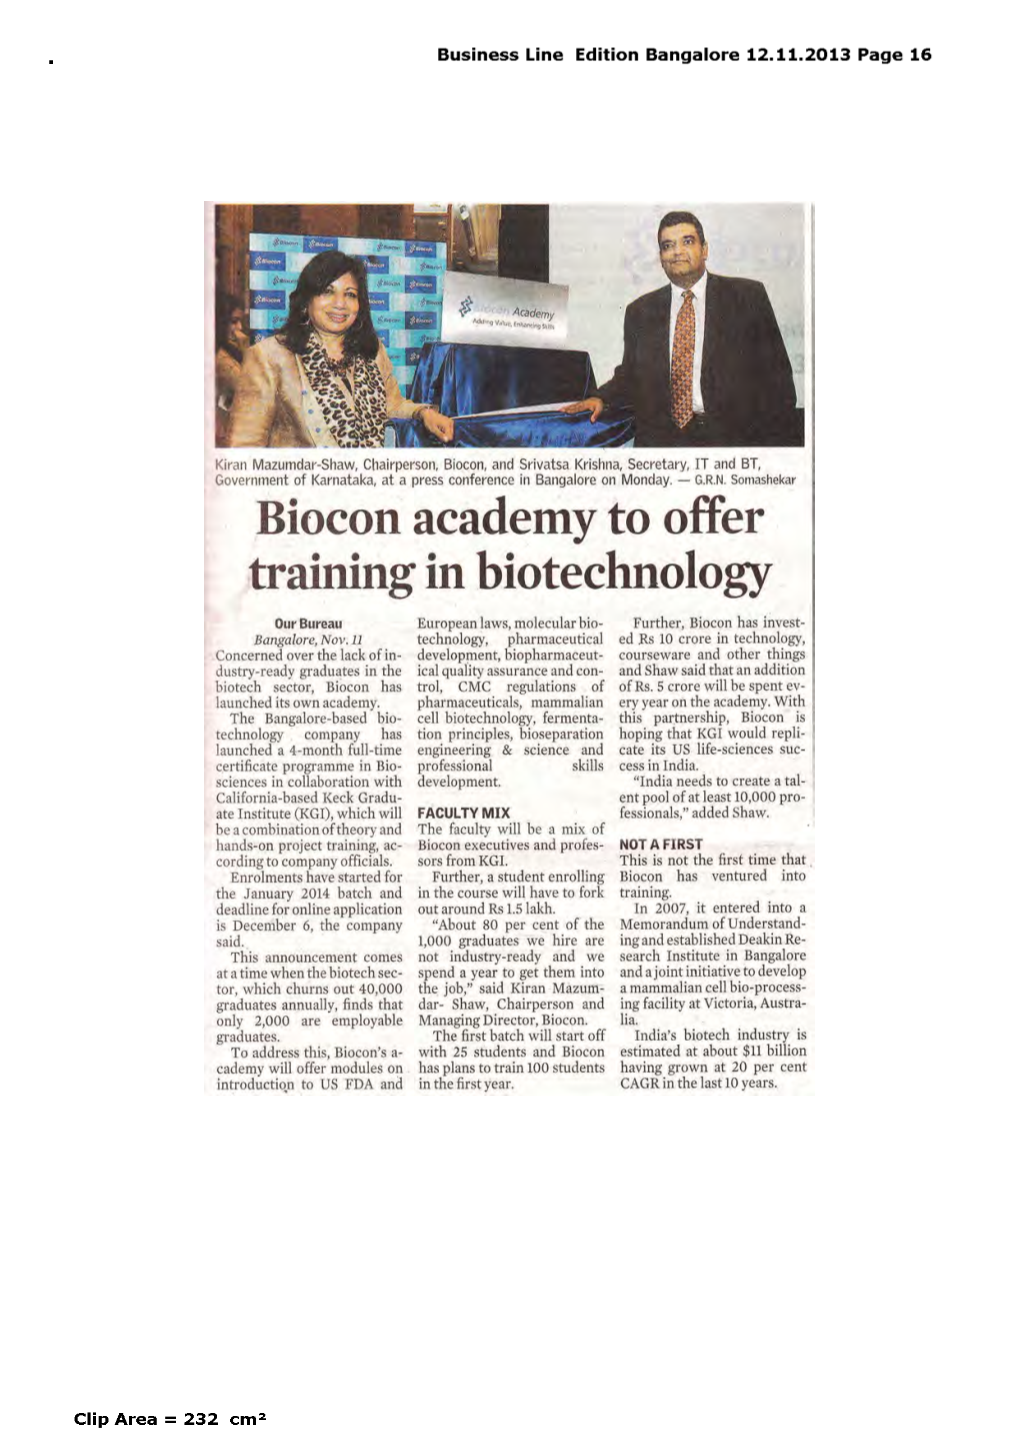 Biocon Academy to Offer Training in Biotechnology